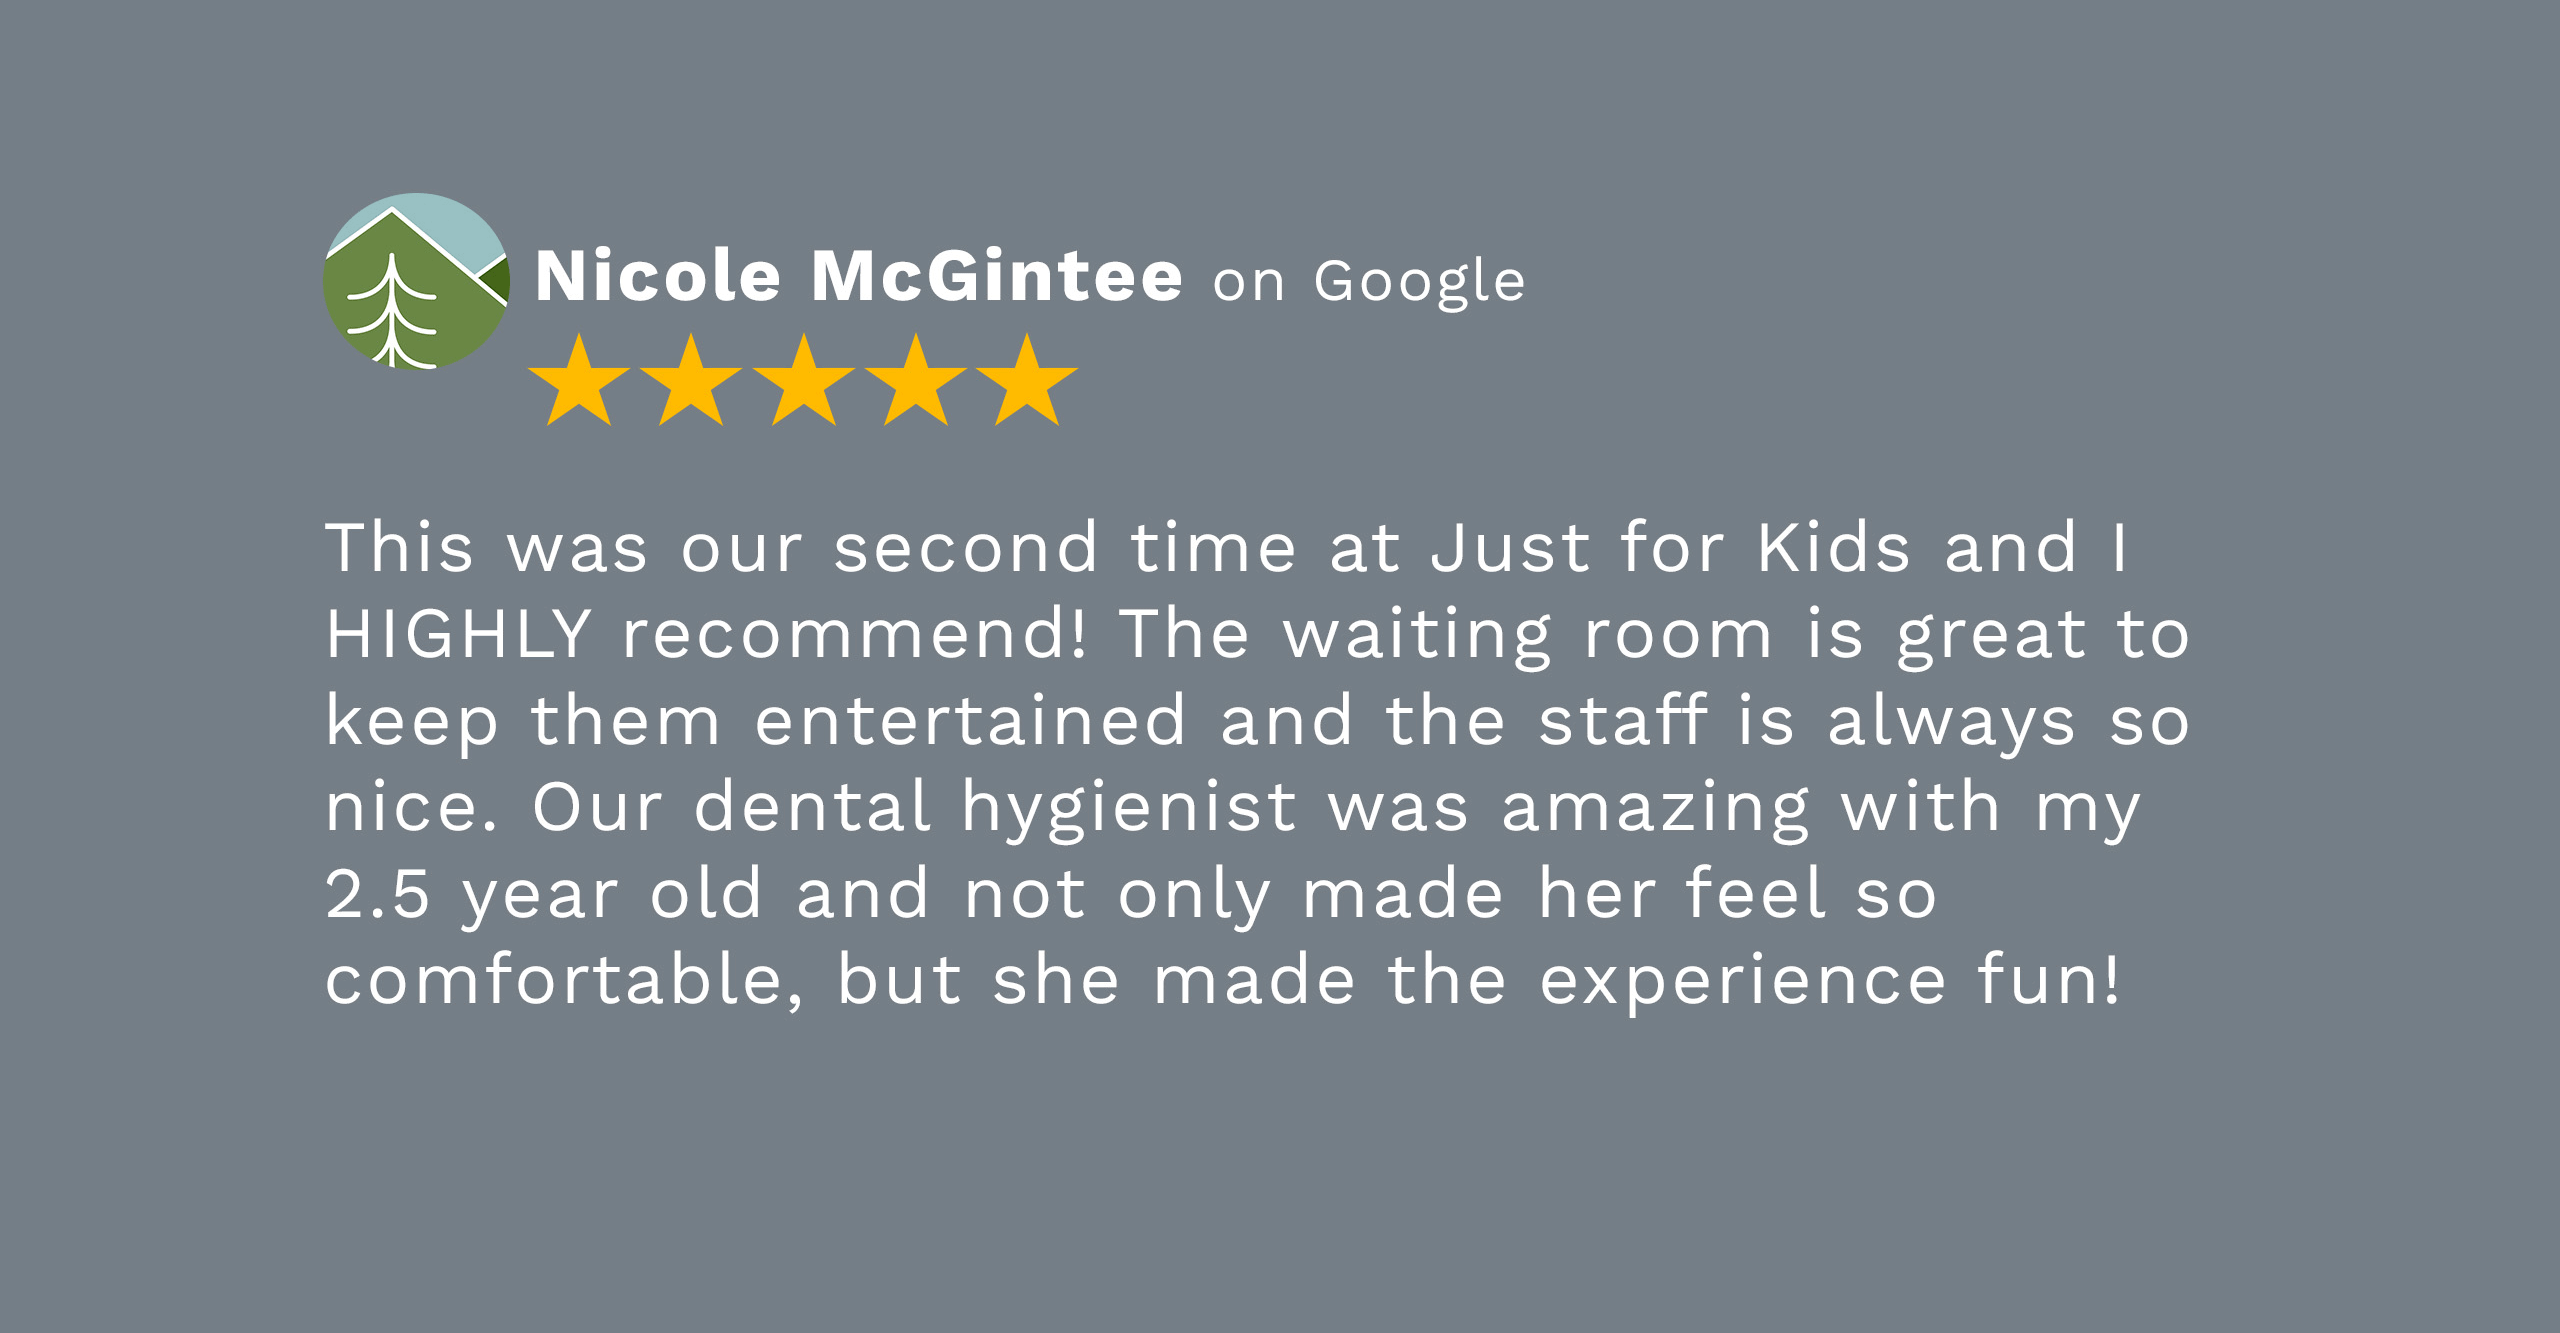 A decorative Google Review graphic with 5 stars and the name Nicole McGintee.